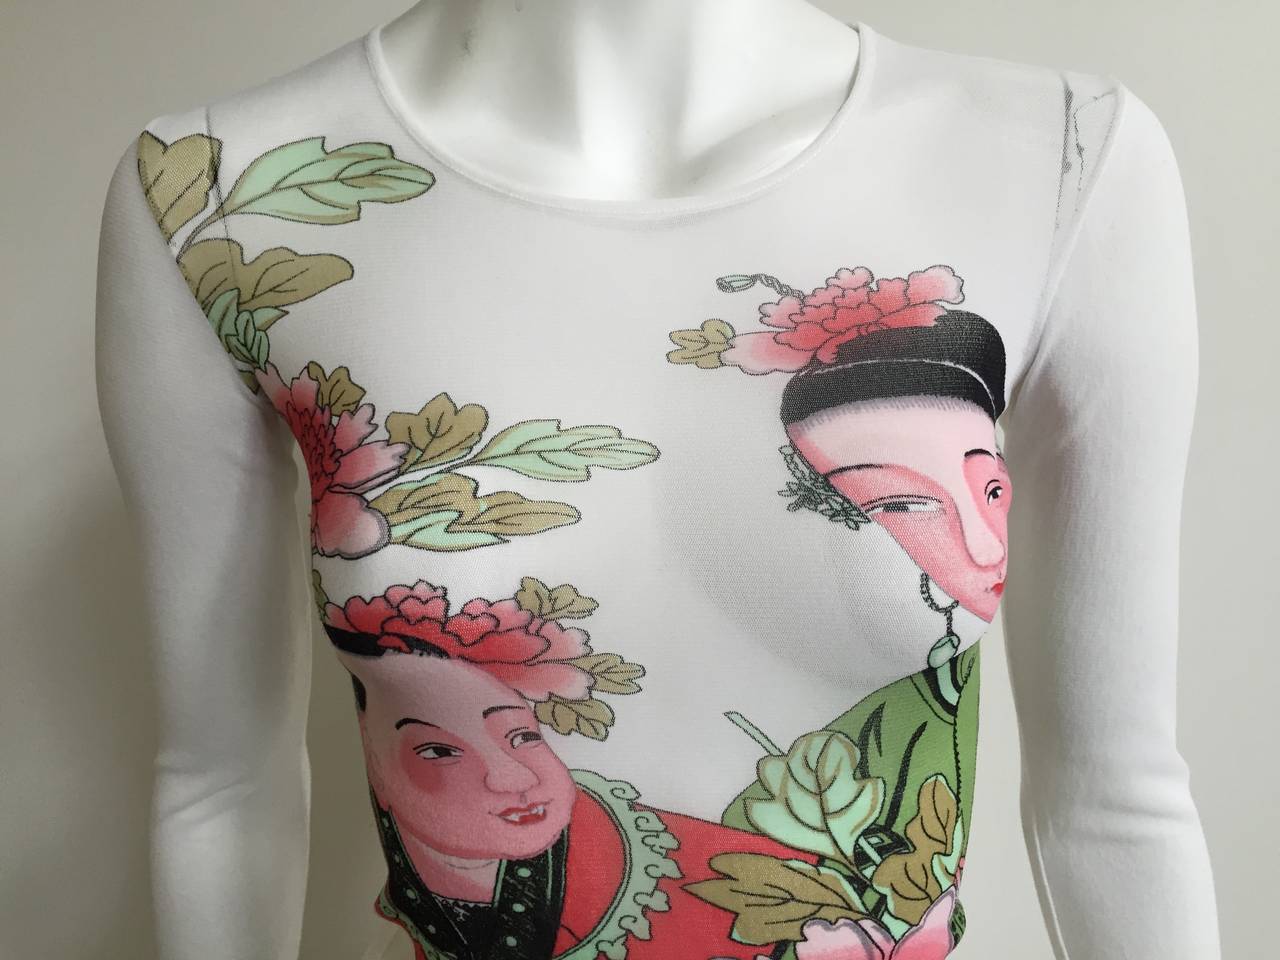 Kenzo Jungle Japanese couple sheer long sleeve top is a size small. The mannequin is a true size 4 and it fits her perfectly. Stretch netting fabric and simply gorgeous. 
Measurements are:
28.5" bust
21" sleeve length
19.5" top